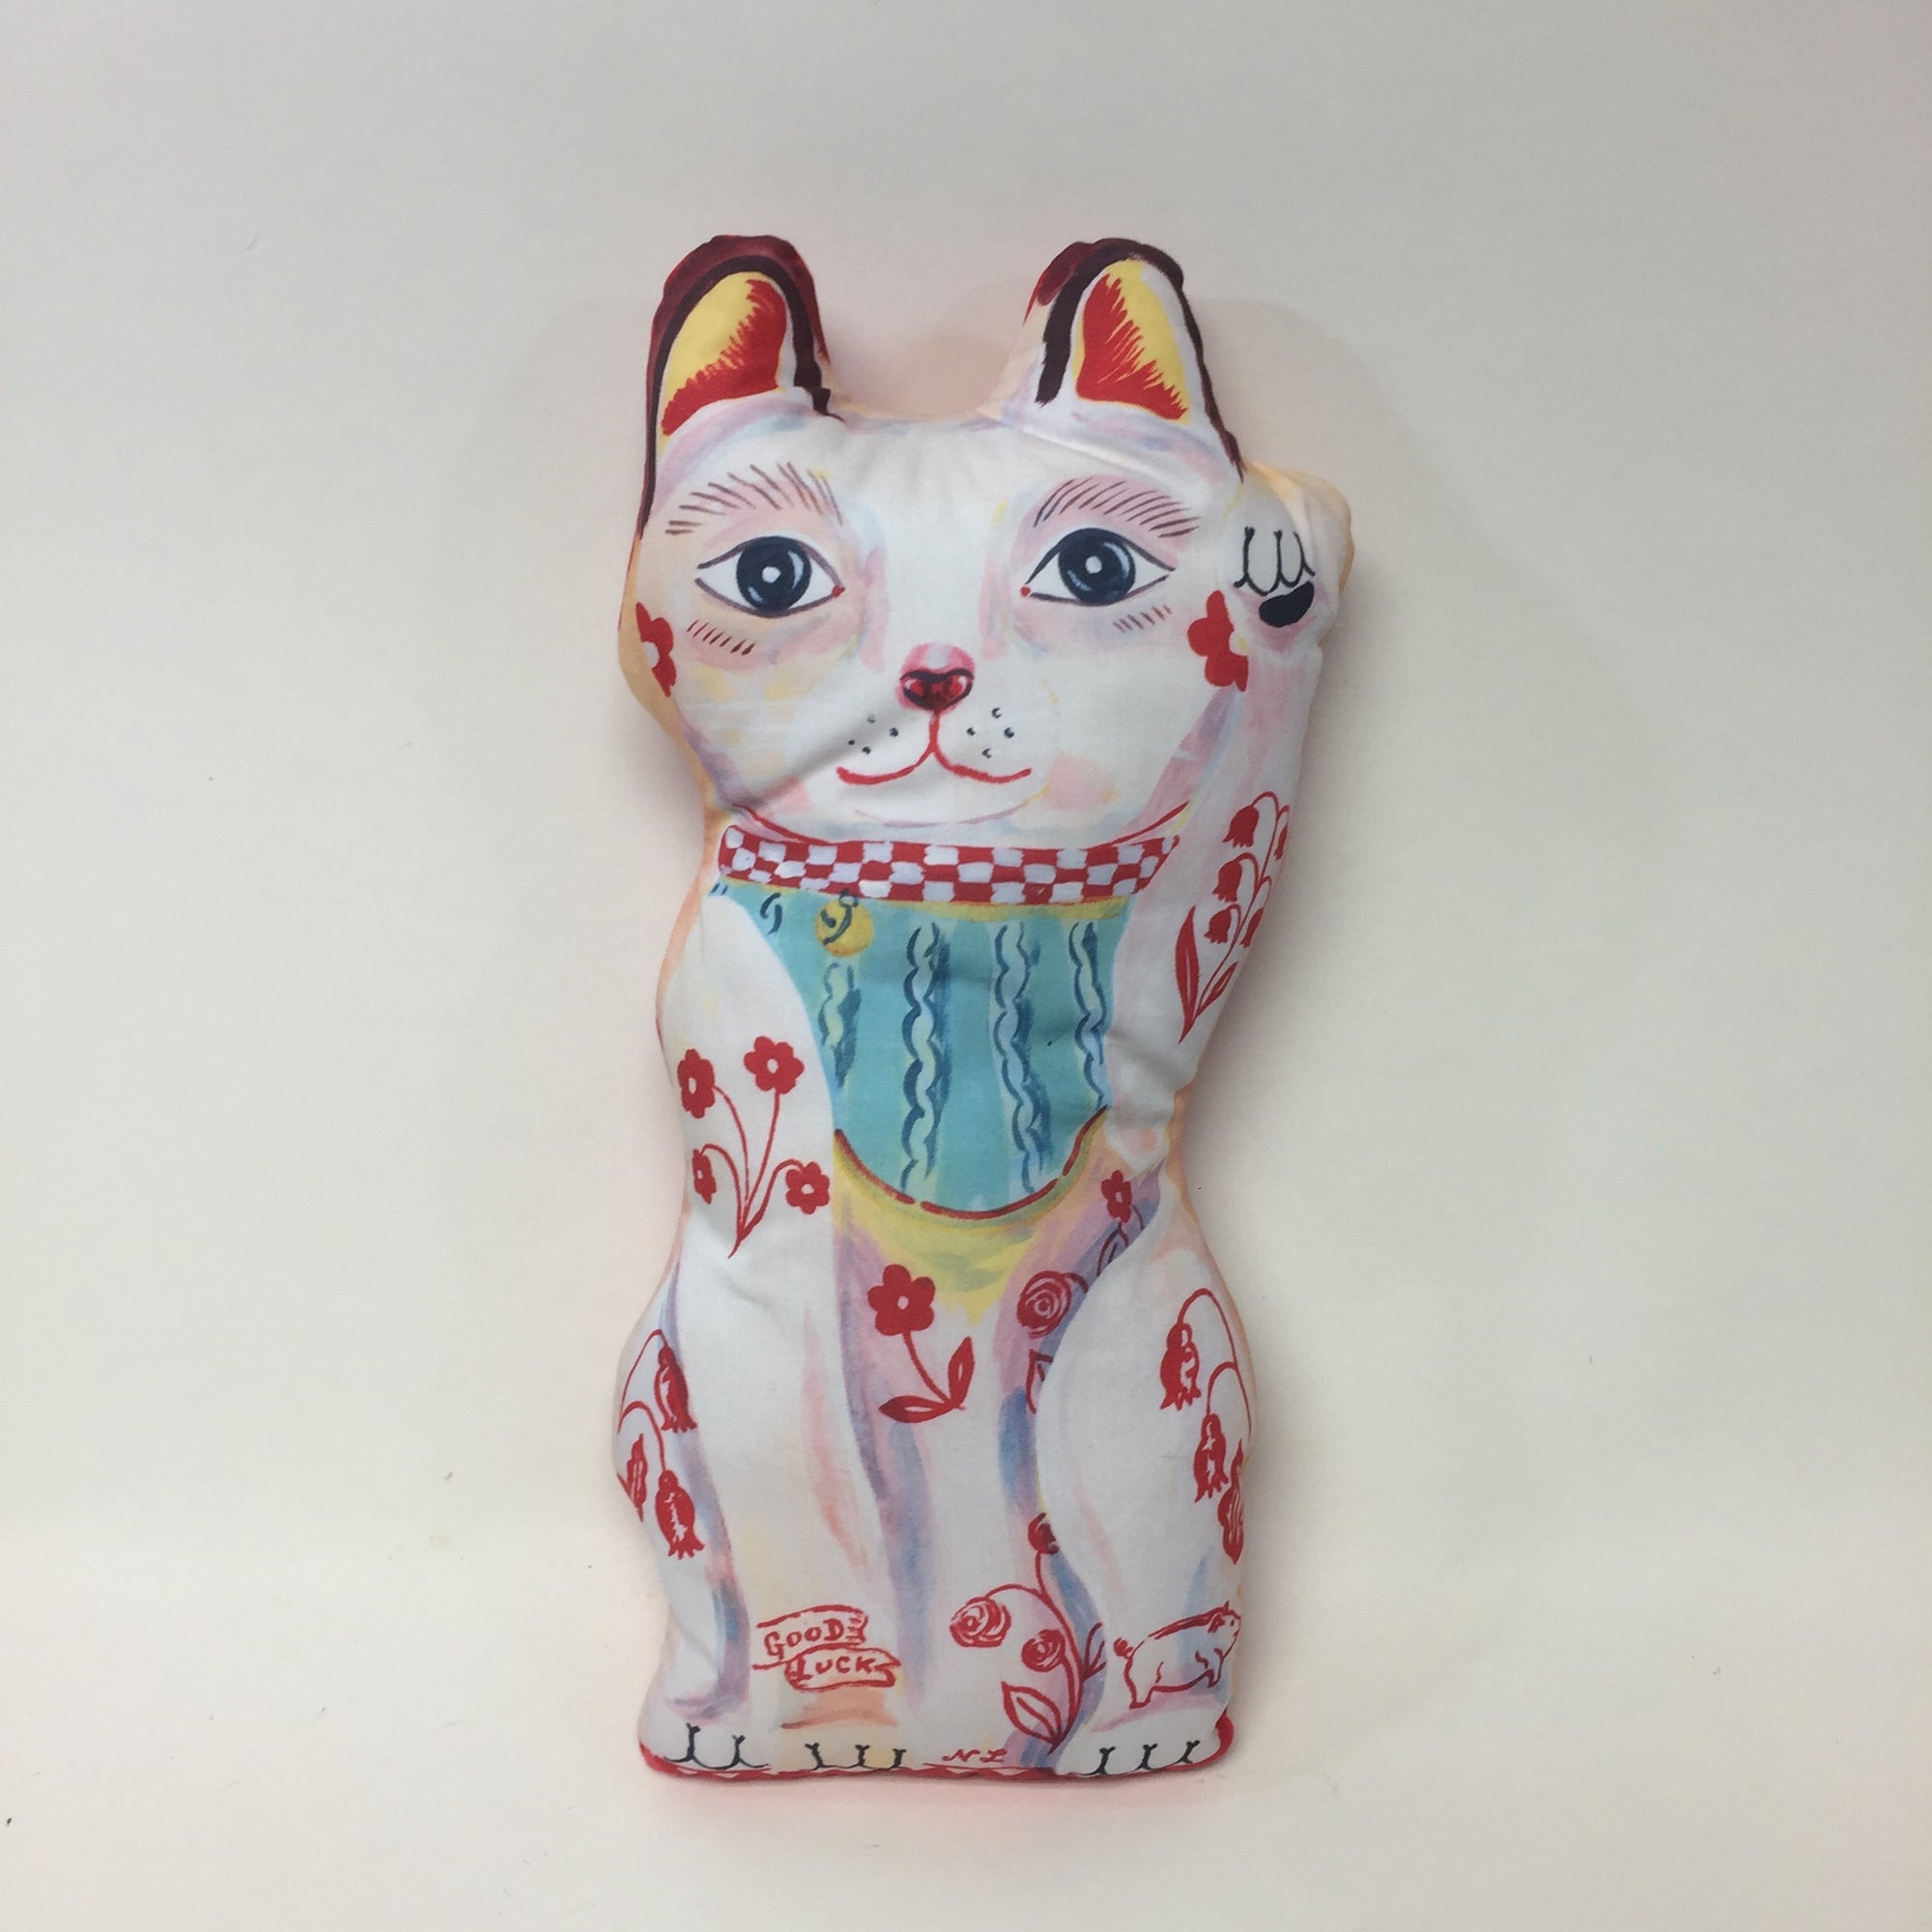 Milky Lucky Cat Soft Sculpture by Nathalie Lete